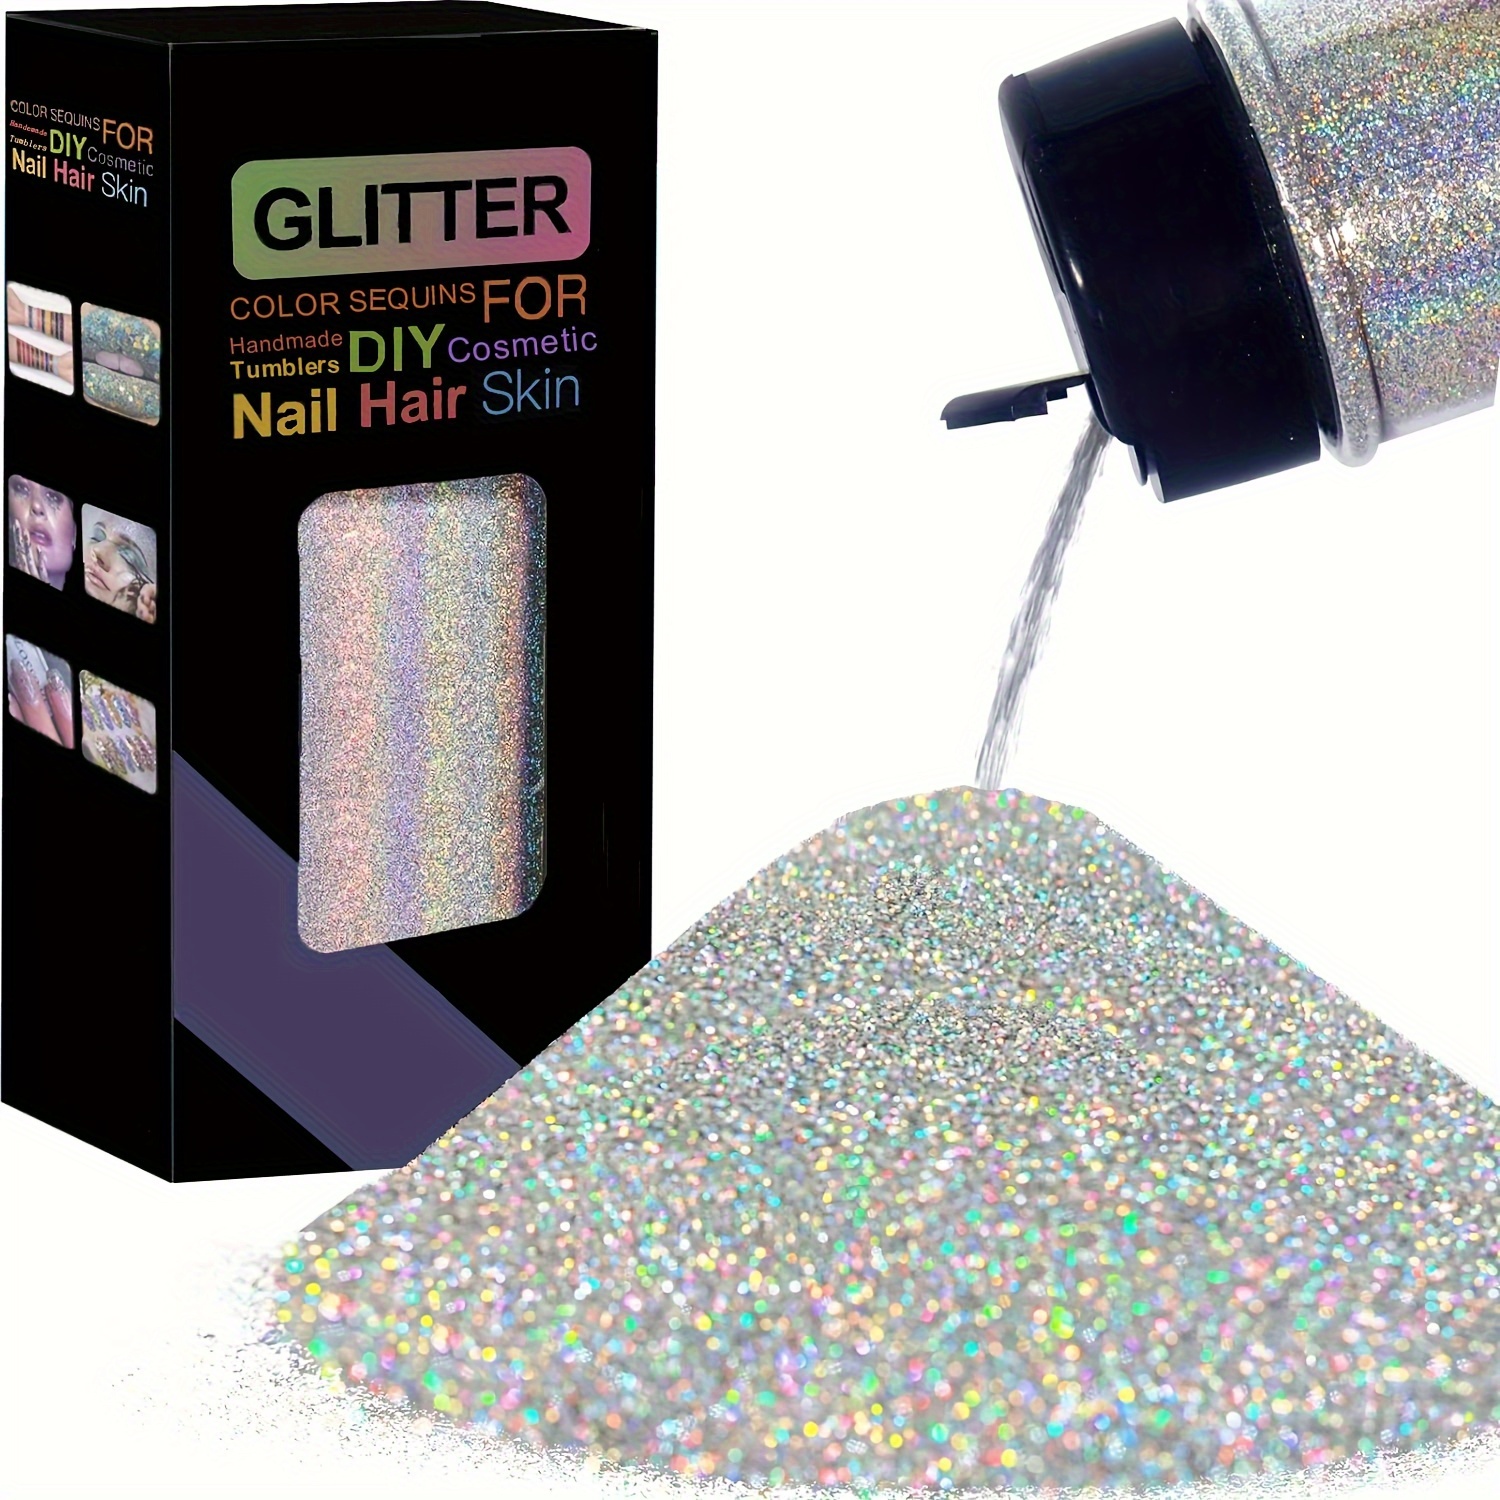 12 Colors Glitter, Fine Glitter, Glitter For Resin, Extra Fine Resin  Glitter Powder, Glitter Crafts And Arts, Scrapbooking, Paints, Assorted  Color Kit